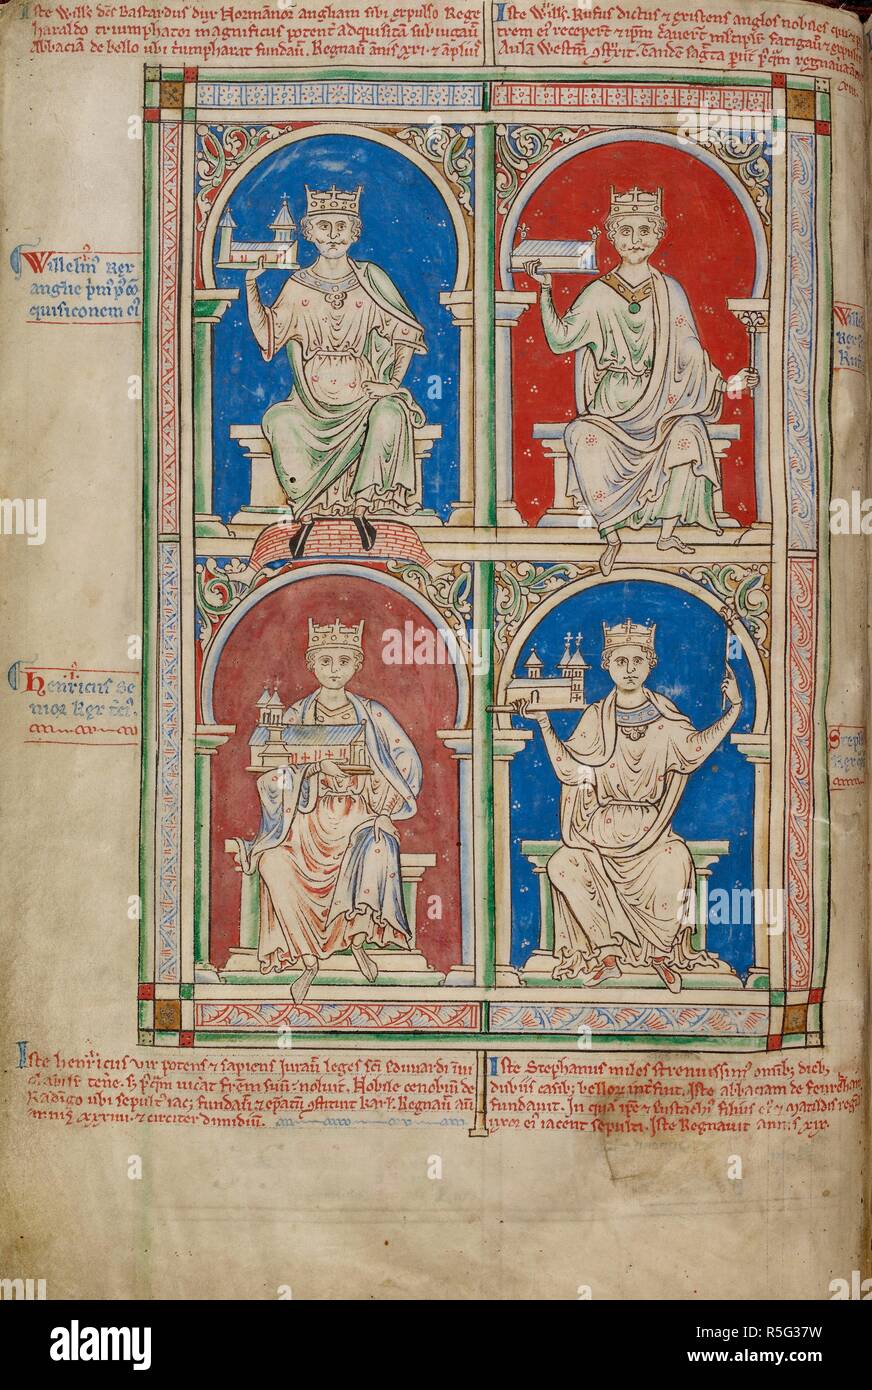 Imaginary portraits of four Kings of England holding models of churches: above, William the Conqueror and William Rufus; below, Henry I and Stephen. Historia Anglorum. England (St Albans), 1250-1259. Source: Royal 14 C. VII, f.8v. Language: Latin. Author: PARIS, MATTHEW. Stock Photo